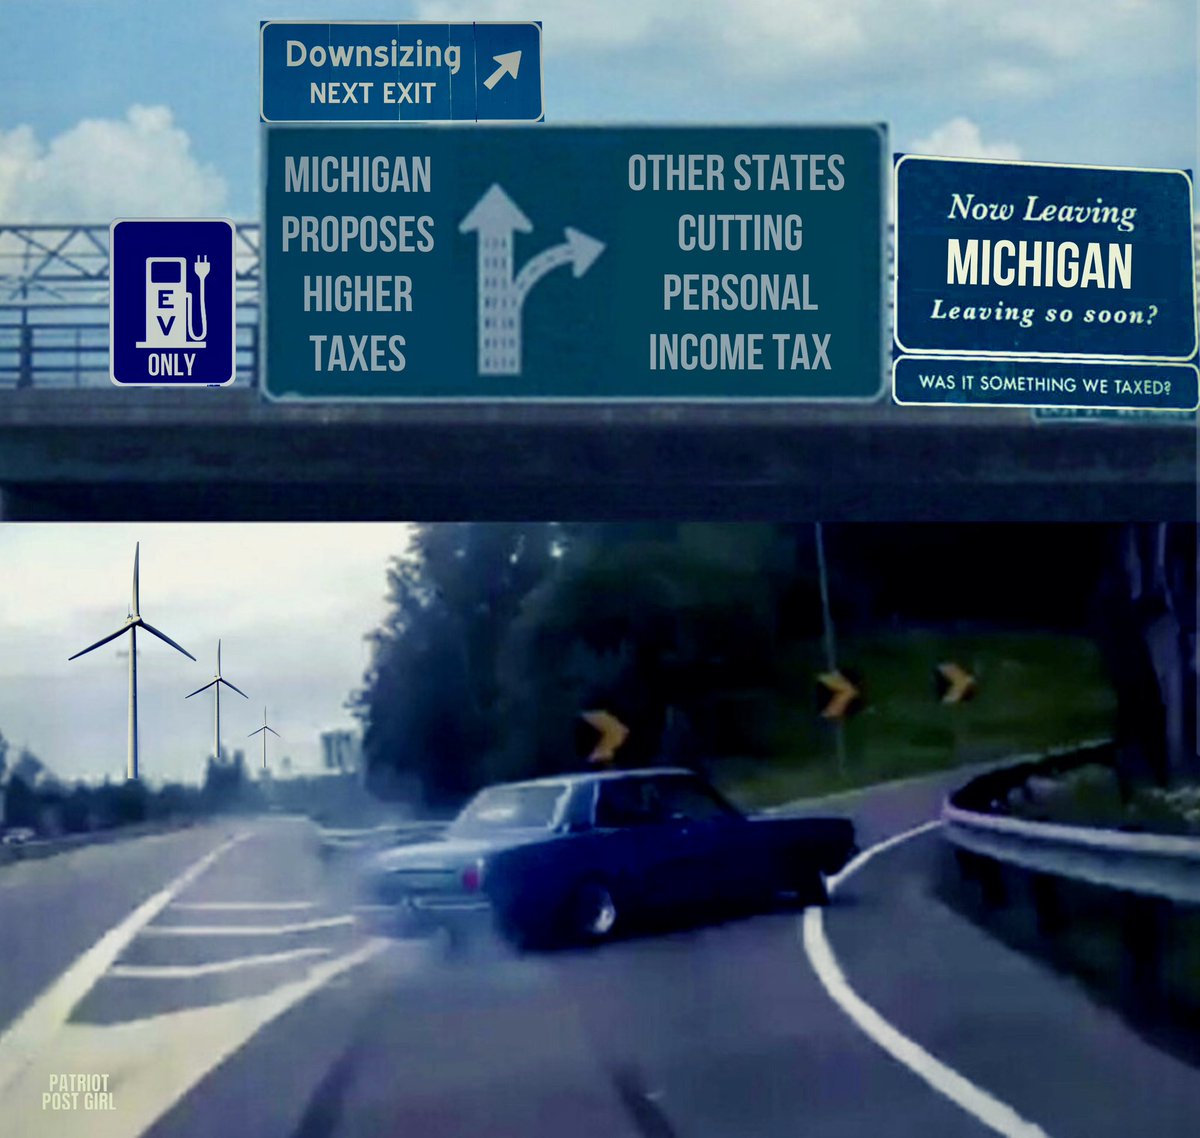 The Michigan Court of Appeals ruled that Michigan taxpayers will have to pay a $714M income tax hike in 2024. When other states provide tax relief, why should anyone be surprised that we are #PureMichiganDownsizing?